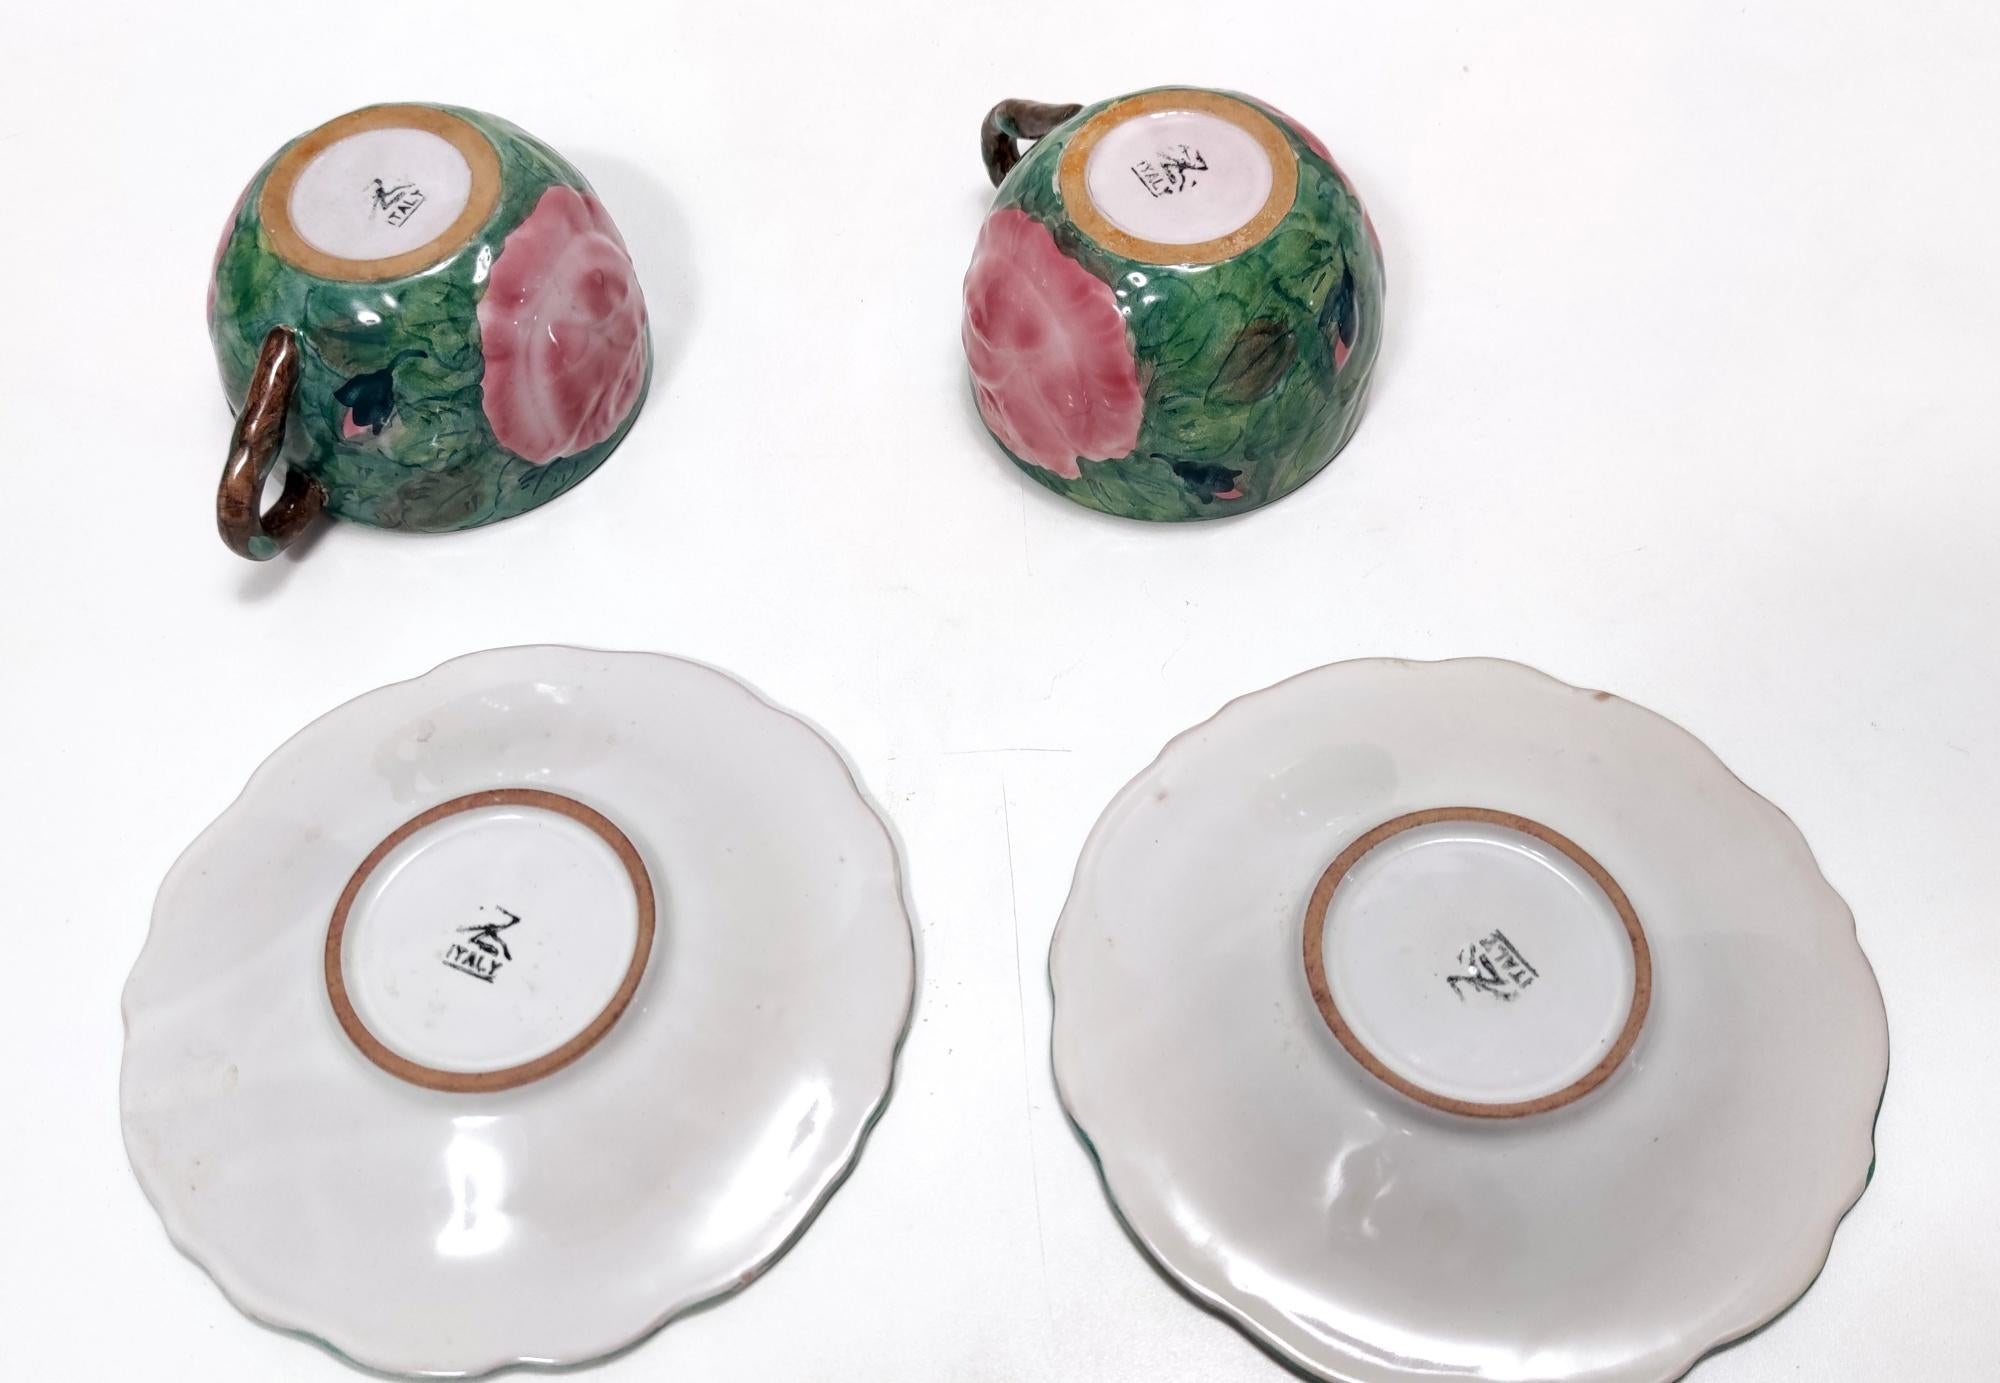 Pair of Vintage Earthenware Tea /Coffee Cups with Floral Motifs by Zaccagnini For Sale 10